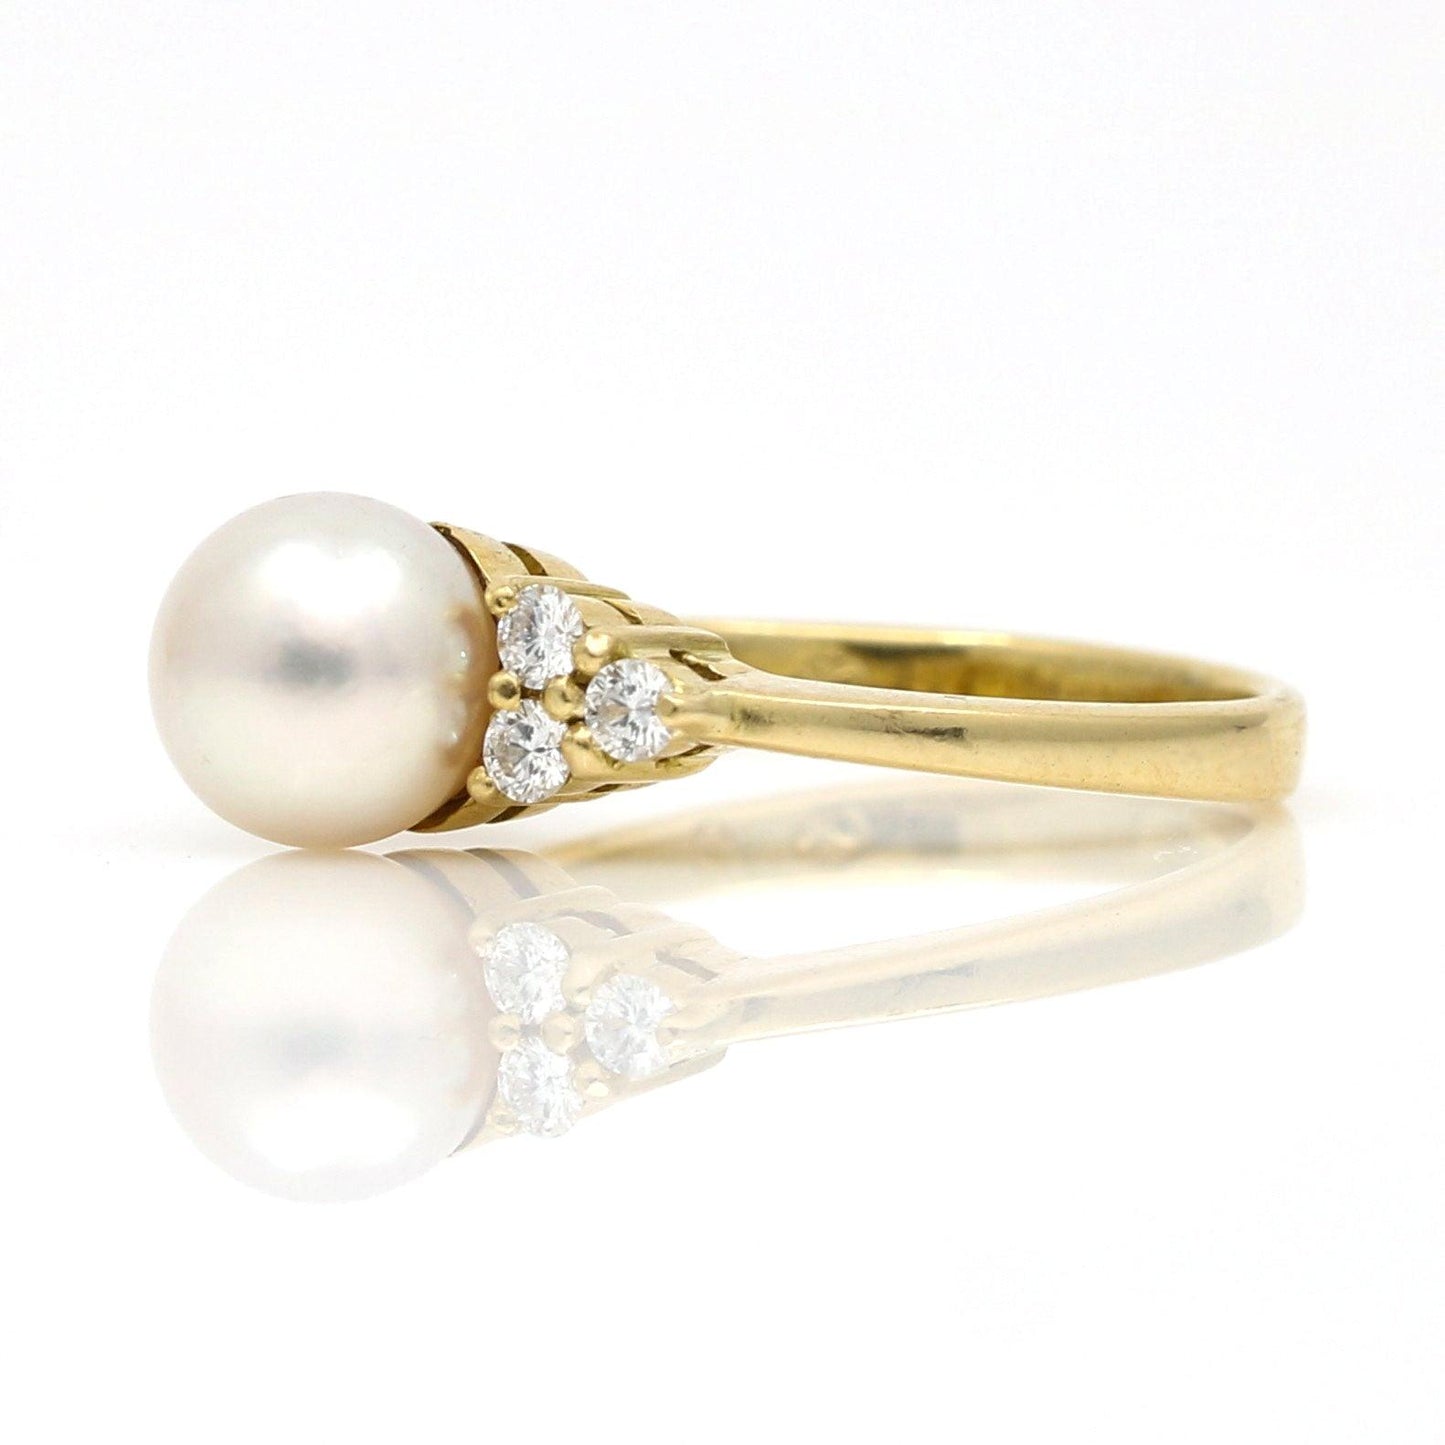 Women's 7.5mm Pearl and Diamond Ring in 18k Yellow Gold SIGNED - 31 Jewels Inc.